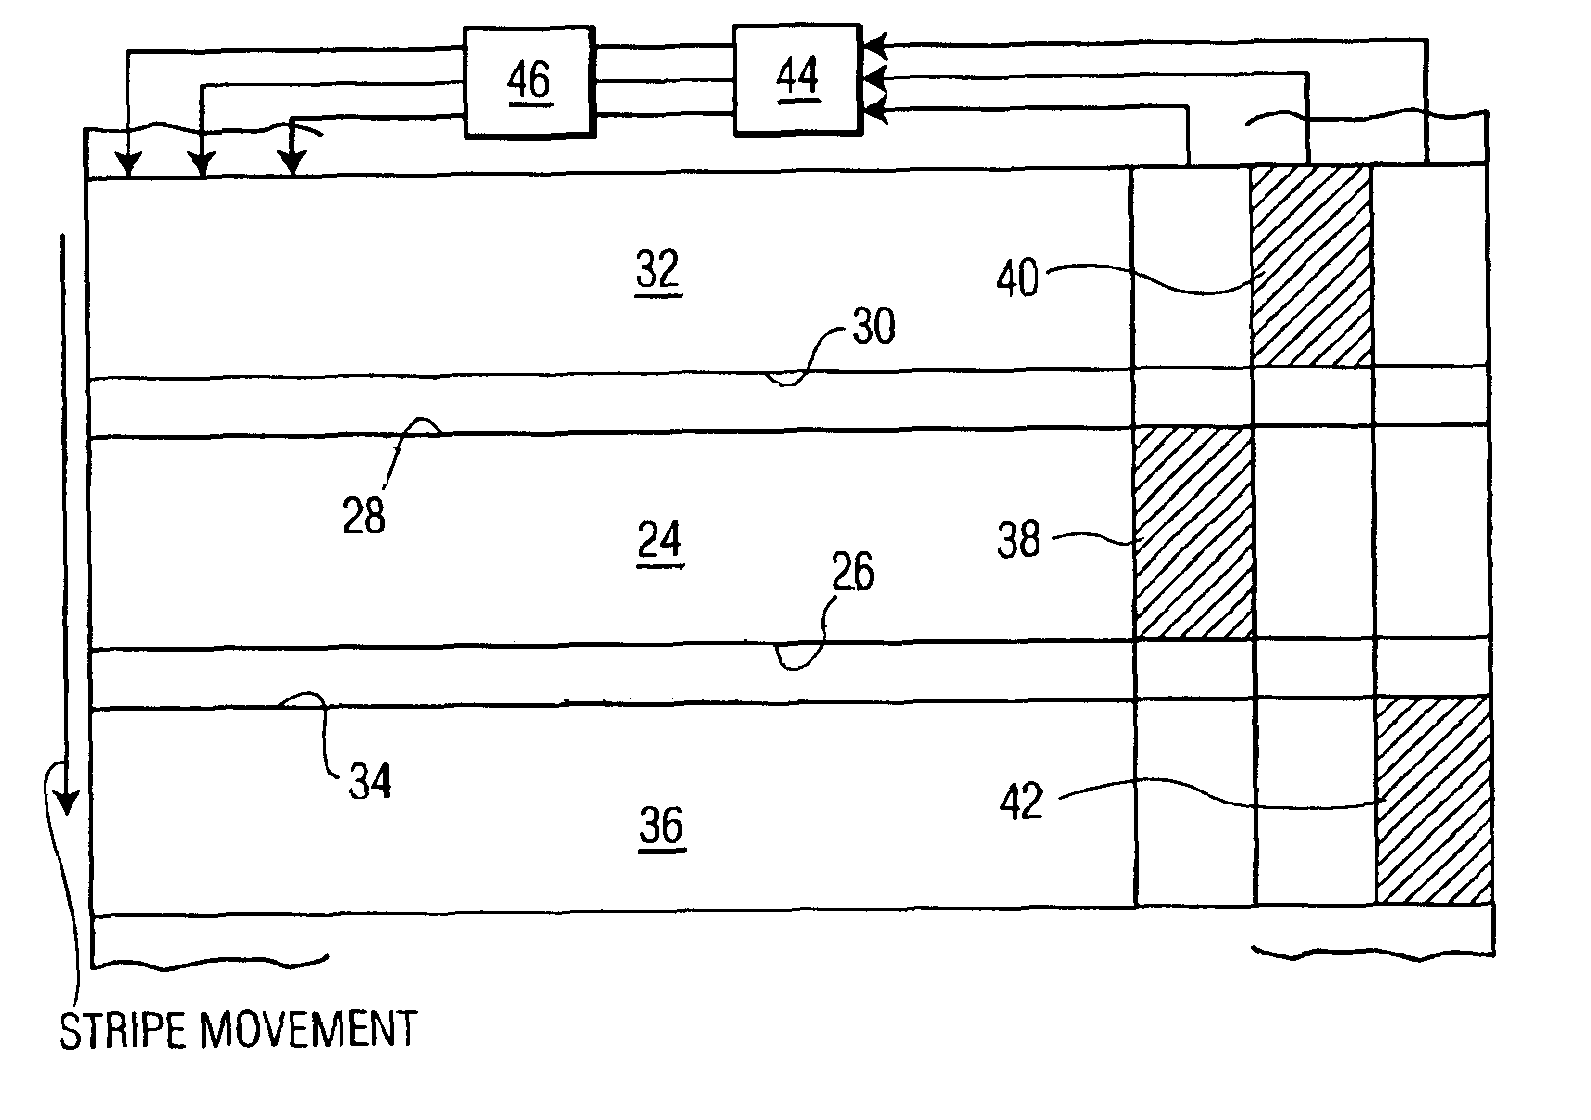 Synchronizing optical scan and electrical addressing of a single-panel, scrolling color LCD system